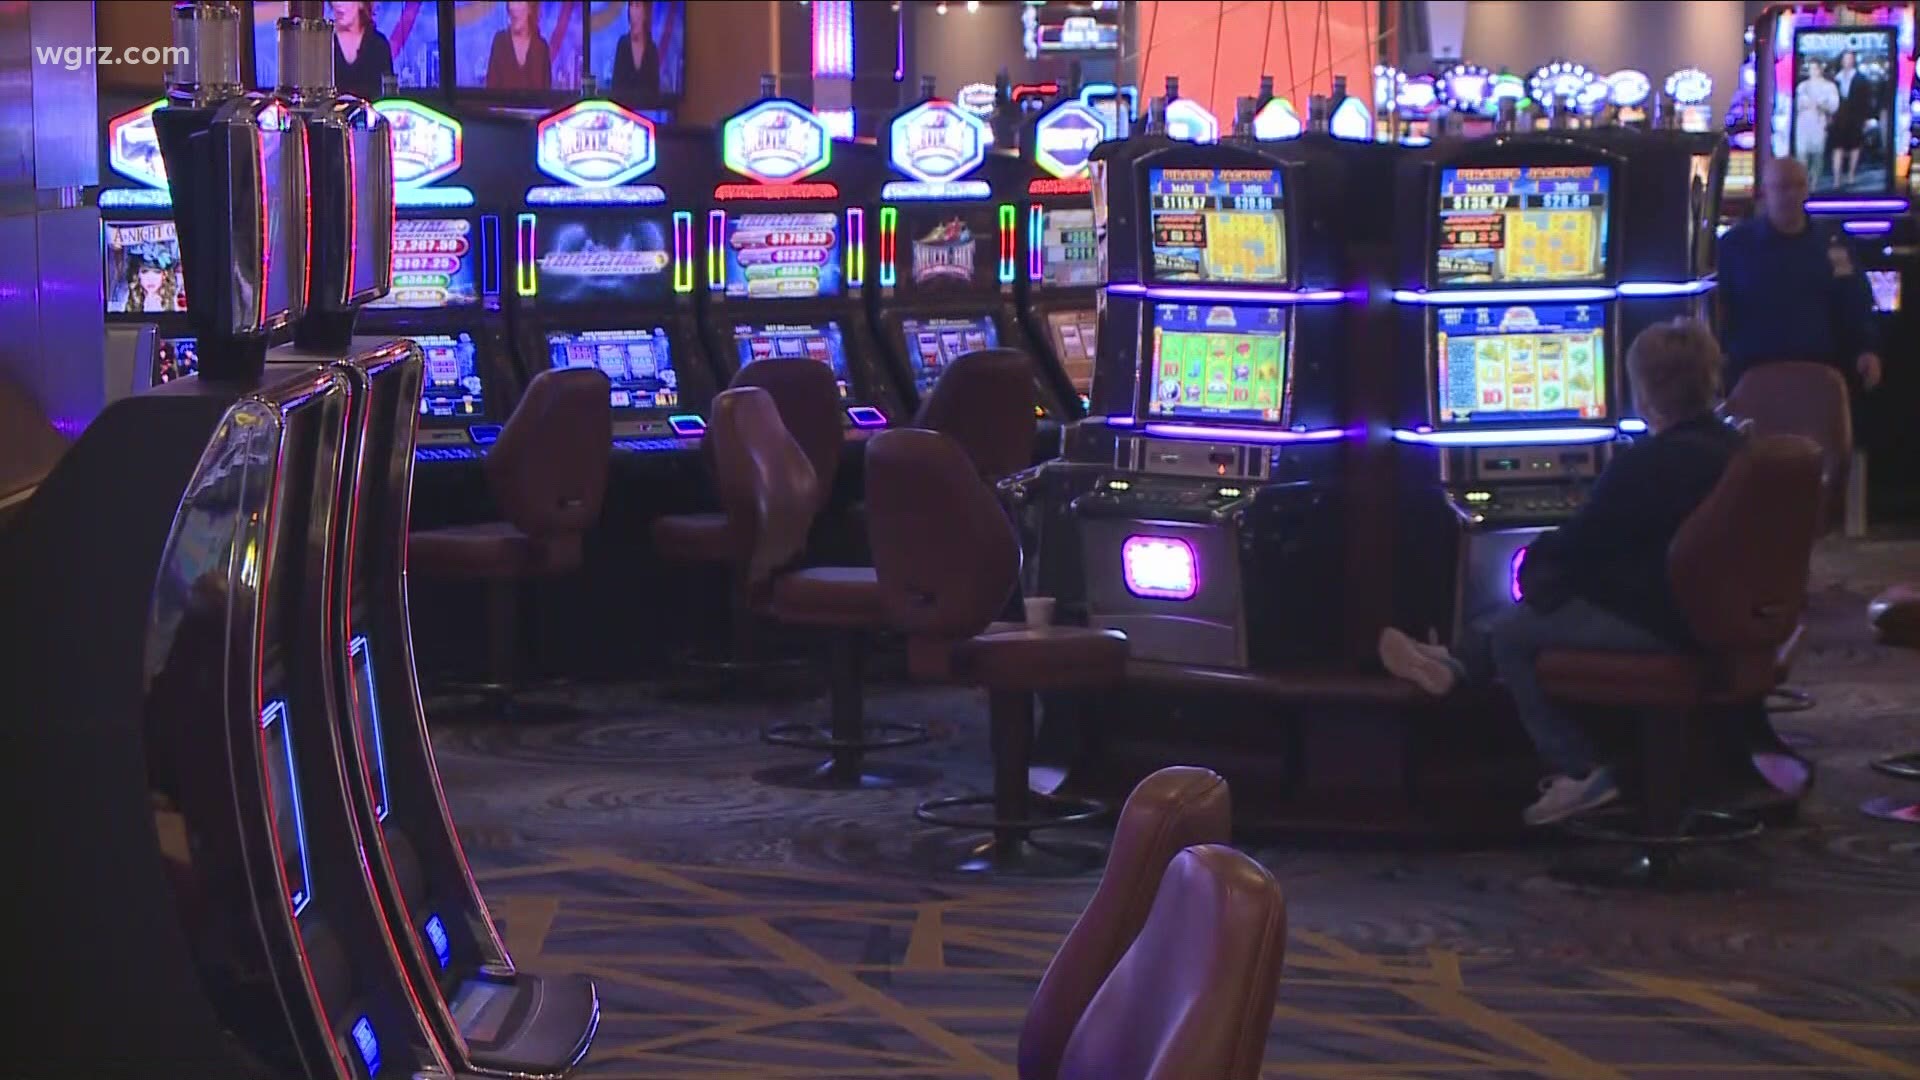 a federal court ruled that the Seneca Nation of Indians will have to pay more than 400 million dollars in casino funds that have been withheld from local governments